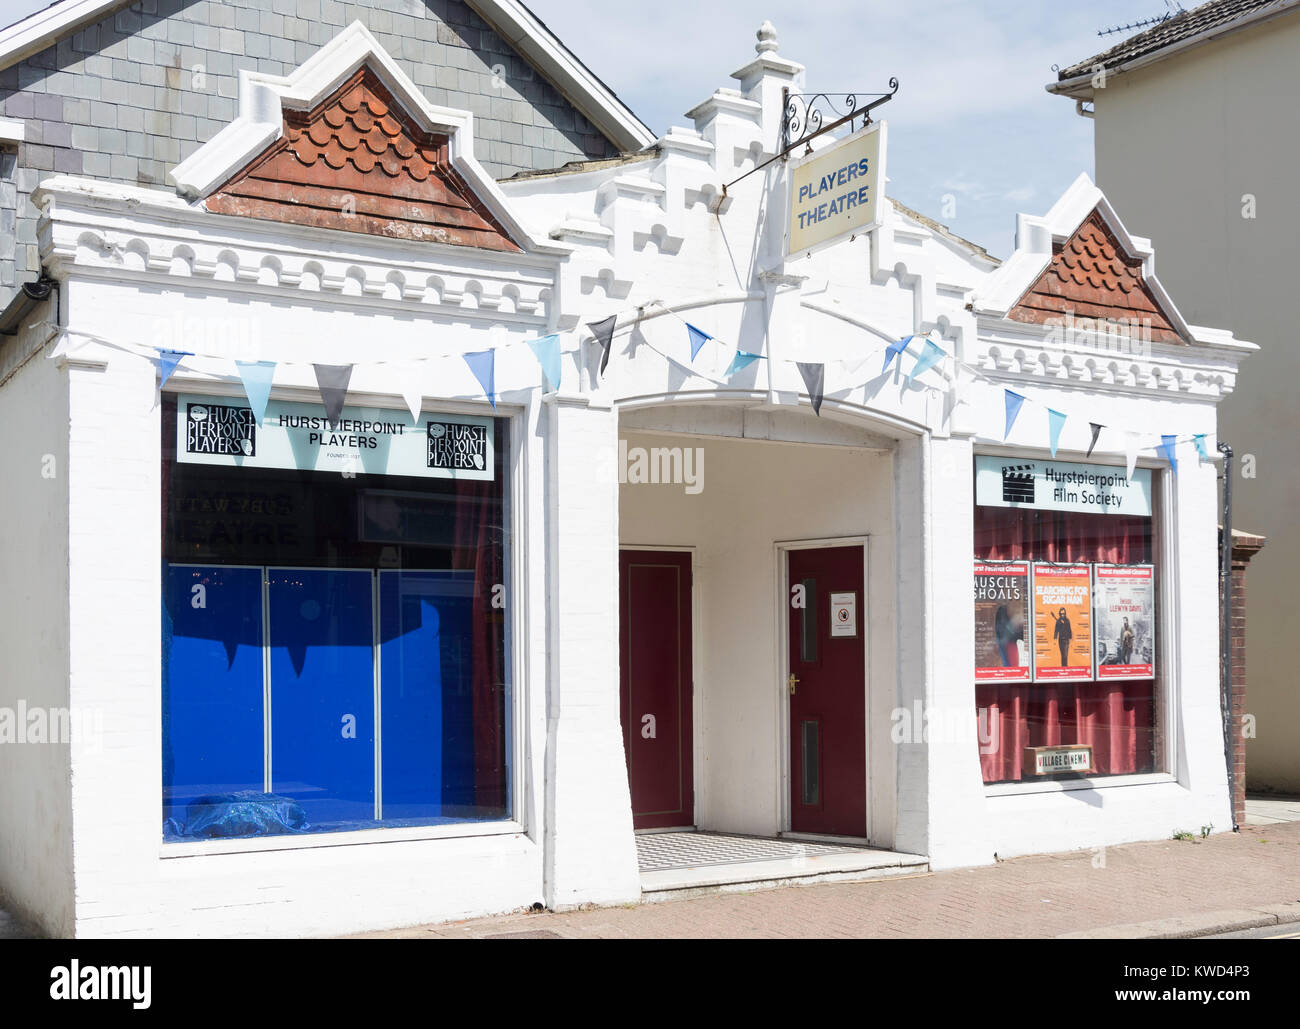 Players Theatre, High Street, Hurstpierpoint, West Sussex, in Inghilterra, Regno Unito Foto Stock